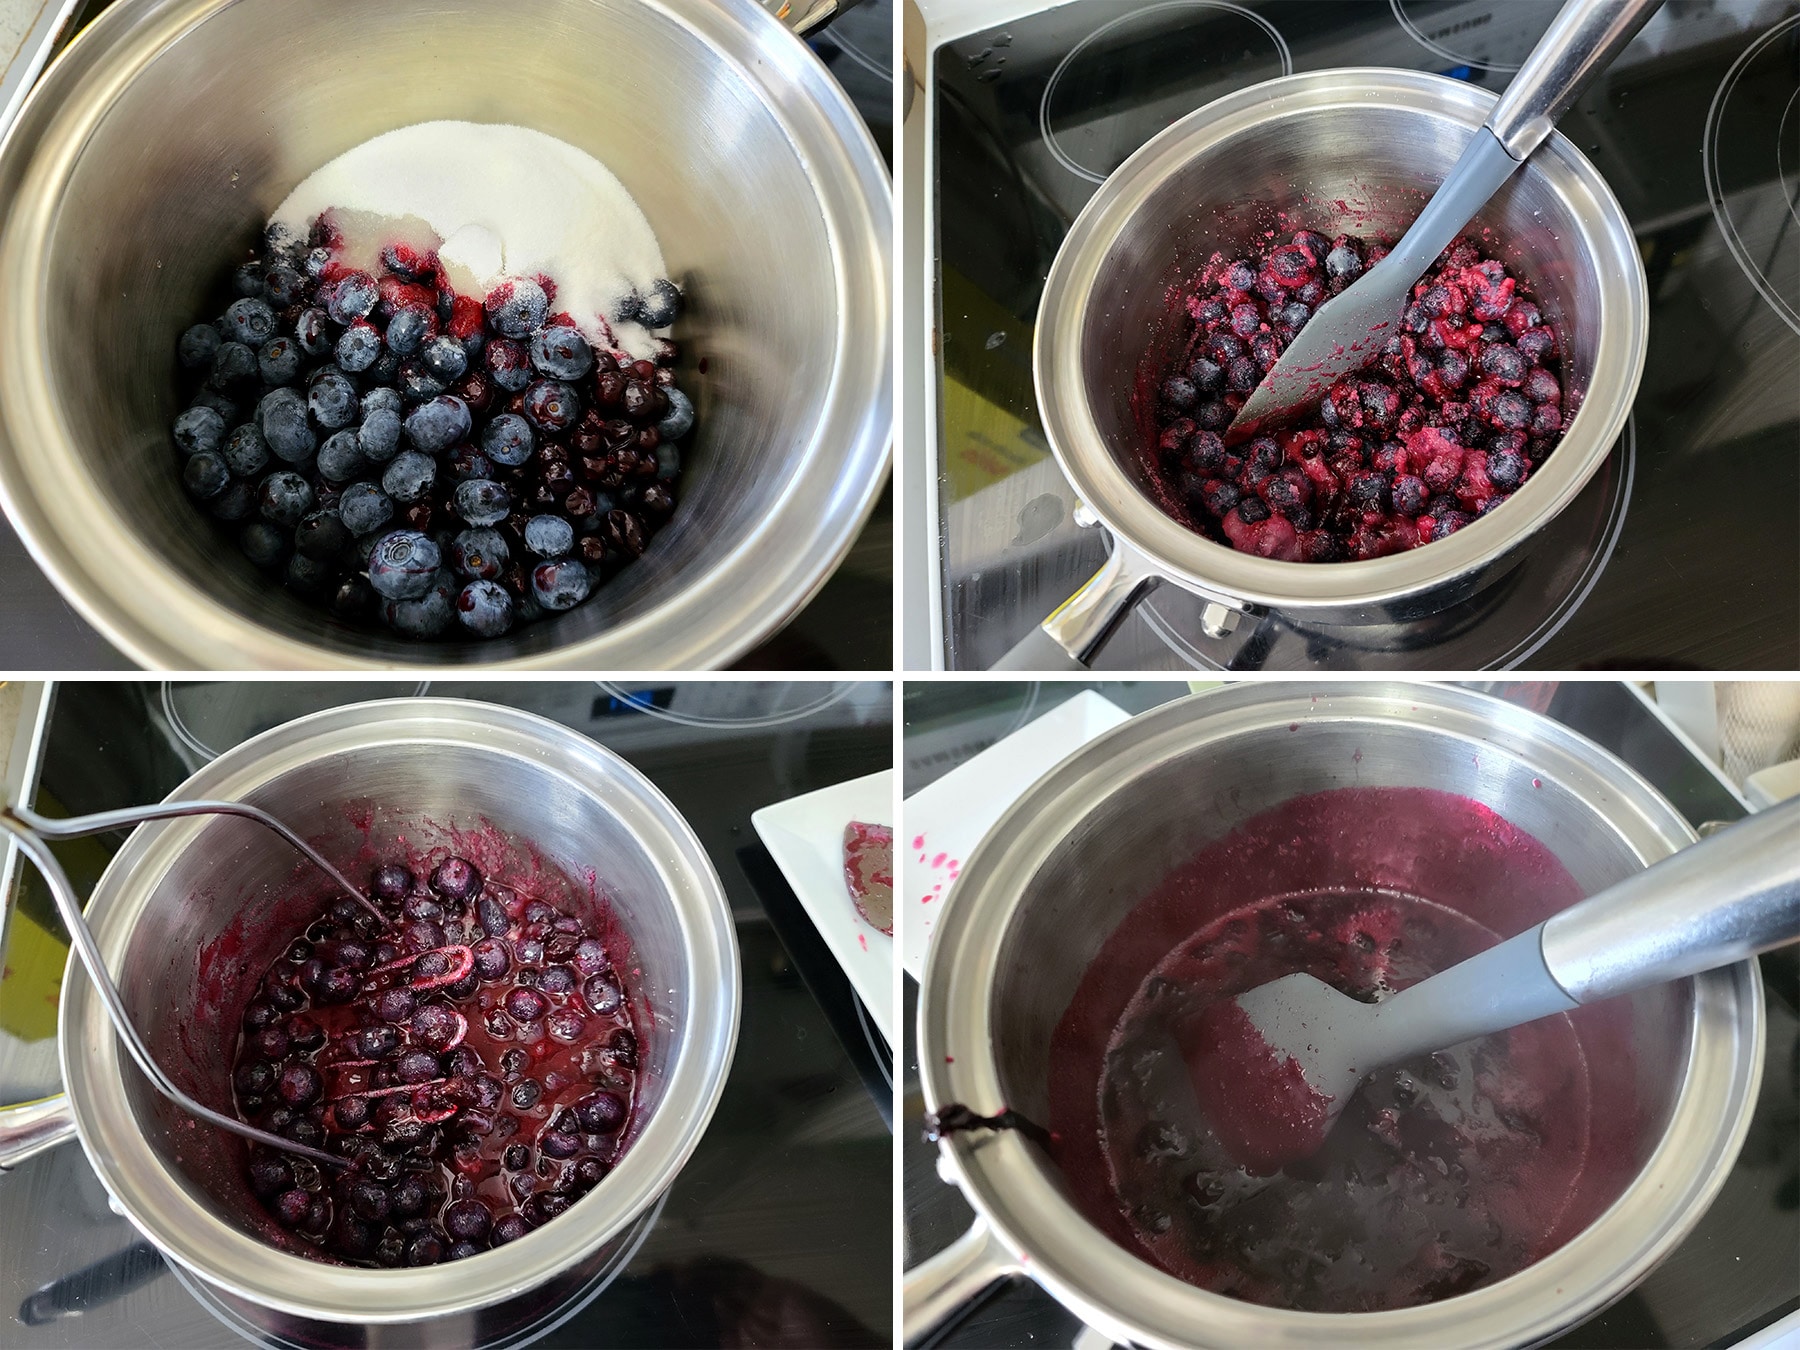 A 4 part image showing blueberries, sugar, and lemon juice being cooked together.